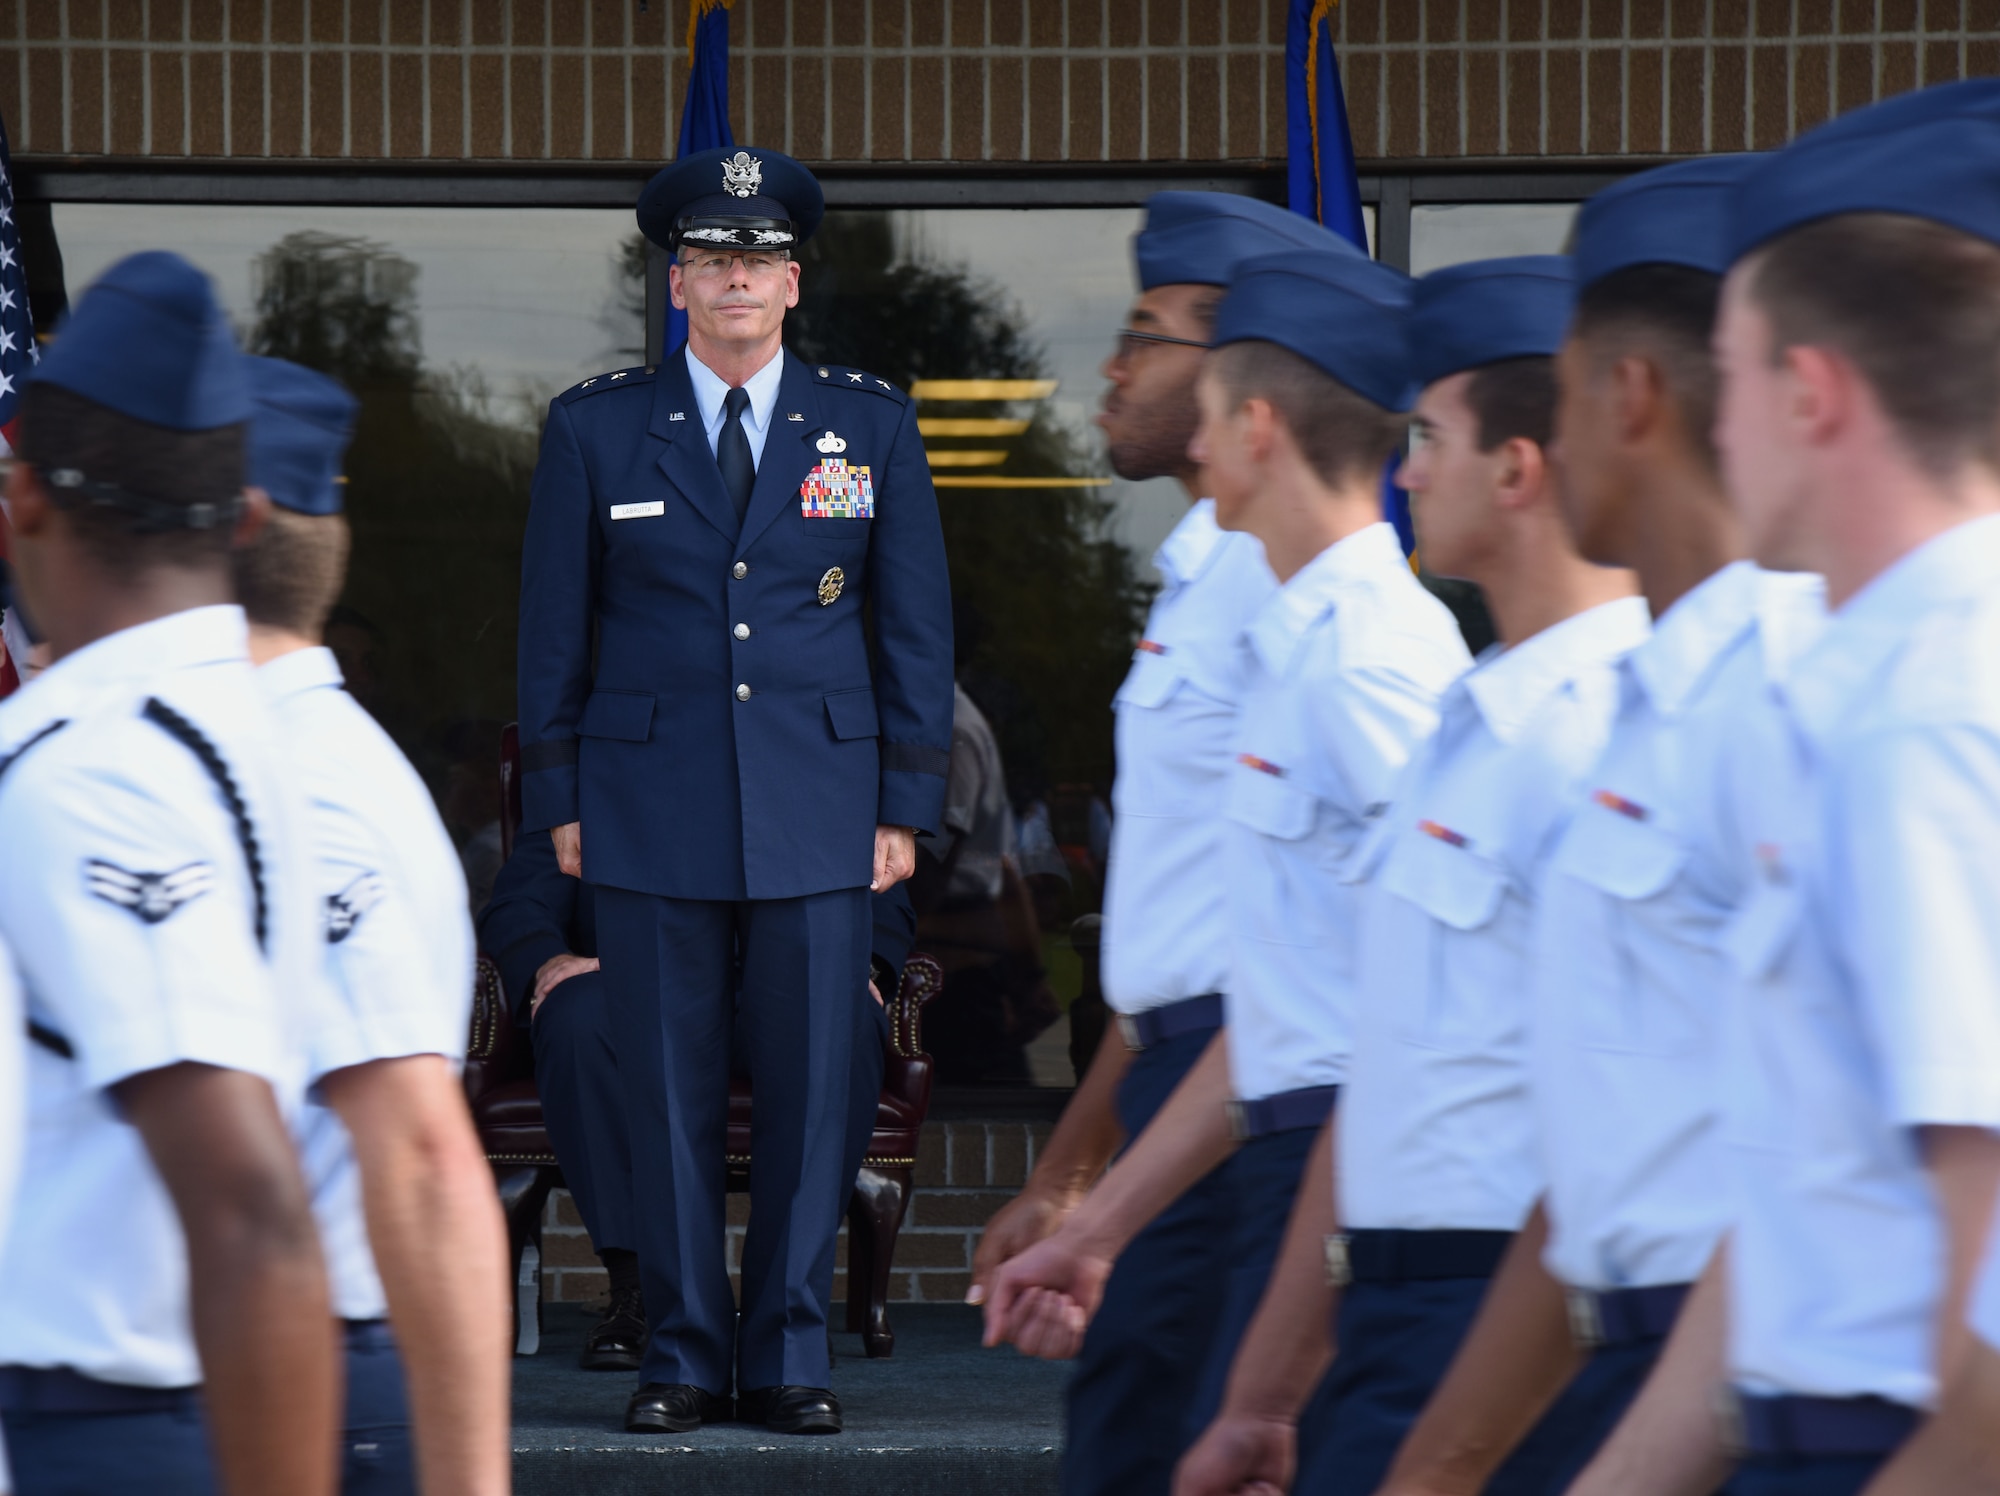 Maj. Gen. Bob LaBrutta, outgoing 2nd Air Force commander, stands at attention during pass and review during the 2nd AF change of command ceremony at the Levitow Training Support Facility Aug. 23, 2017, on Keesler Air Force Base, Miss. (U.S. Air Force photo by Kemberly Groue)